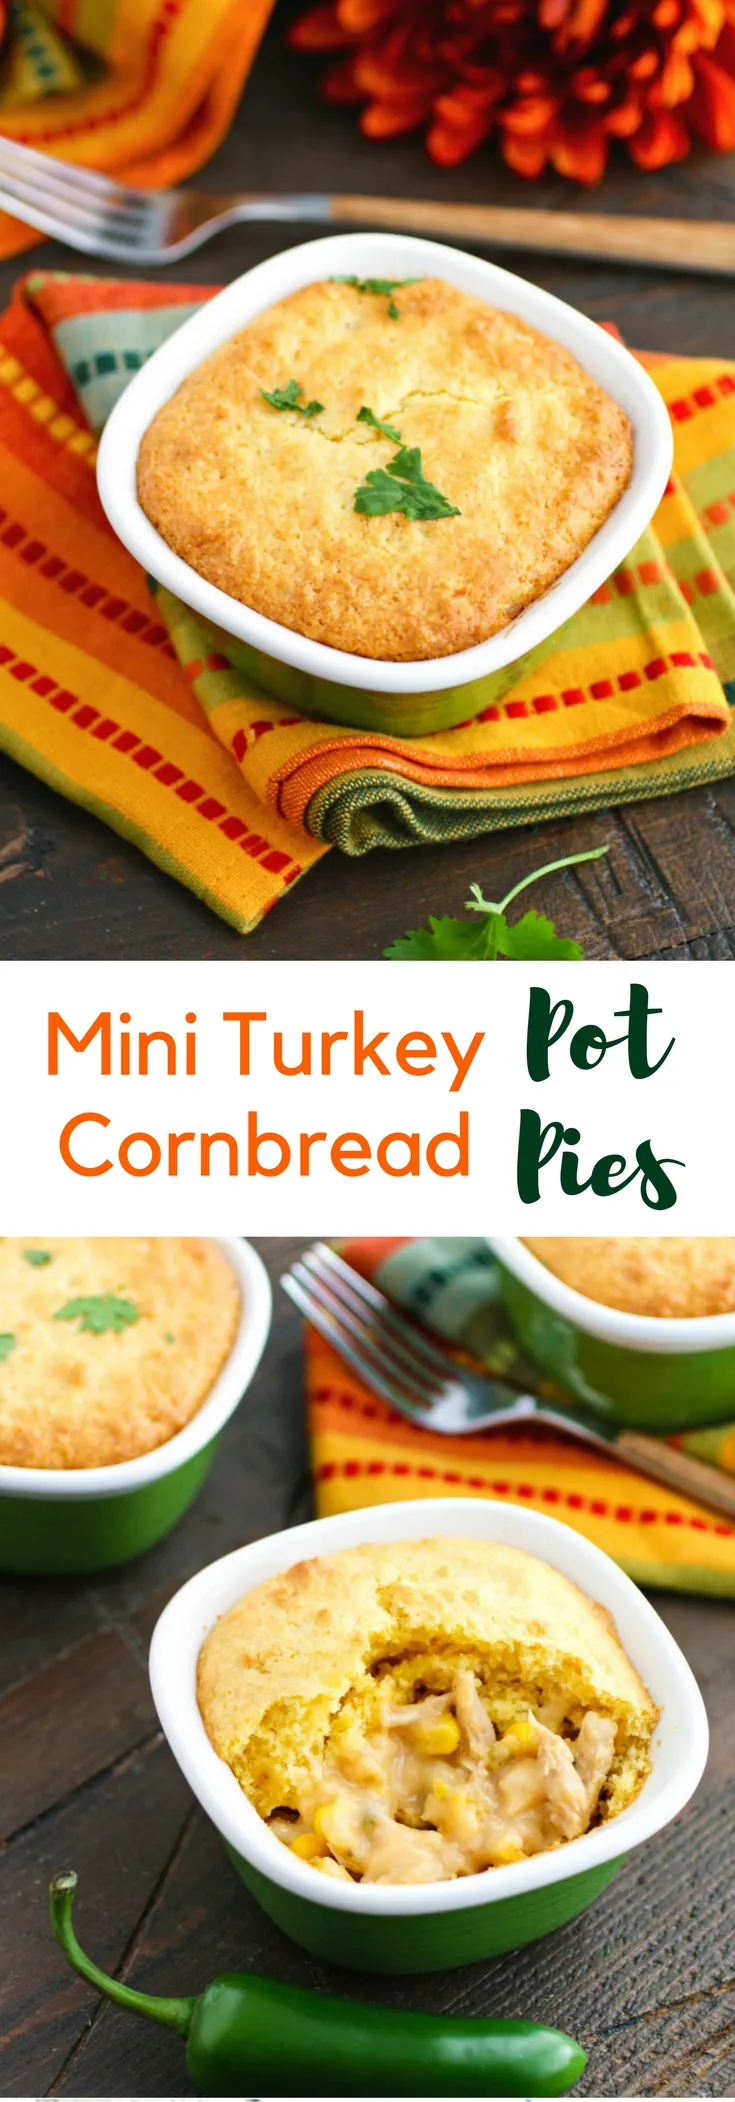 Mini Turkey Cornbread Pot Pies are a fun way to use up your leftover Thanksgiving turkey! You'll love these pot pies!